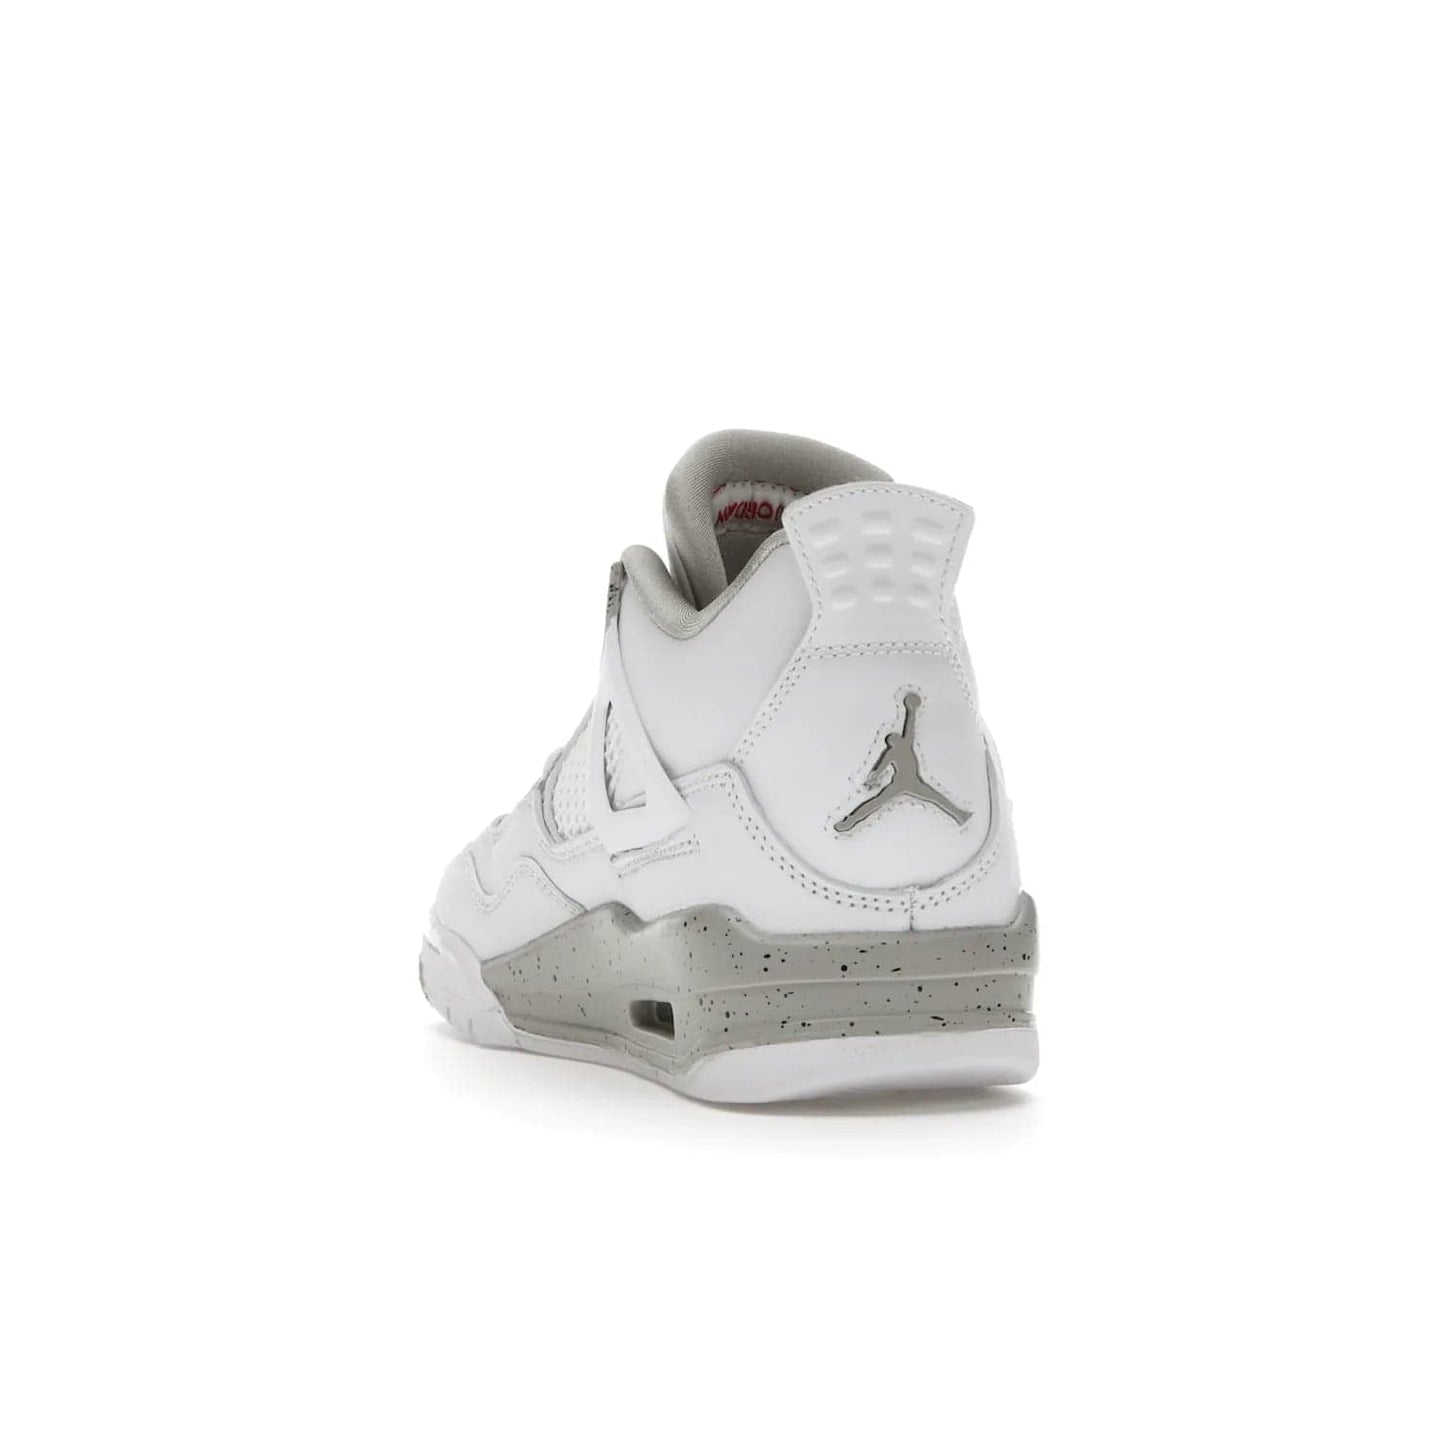 Jordan 4 Retro White Oreo (2021) (GS) - Image 26 - Only at www.BallersClubKickz.com - White Oreo Air Jordan 4 Retro 2021 GS - Iconic sneaker silhouette with white canvas upper, Tech Grey detailing, and Fire Red accents. Available July 2021.